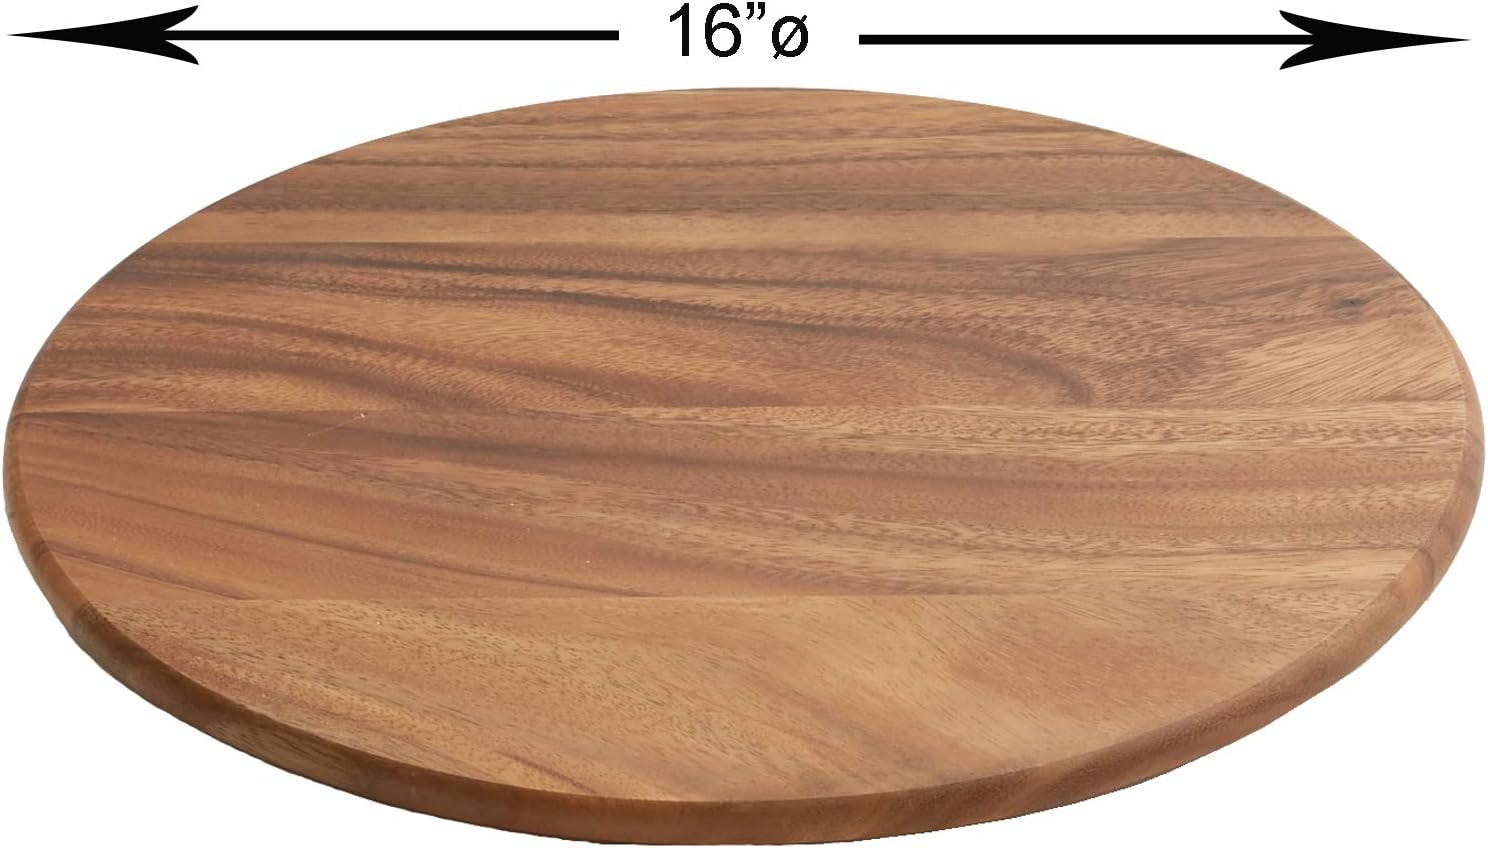 Eco-Friendly Acacia Wood 16" Lazy Susan with Stainless Steel Mechanism